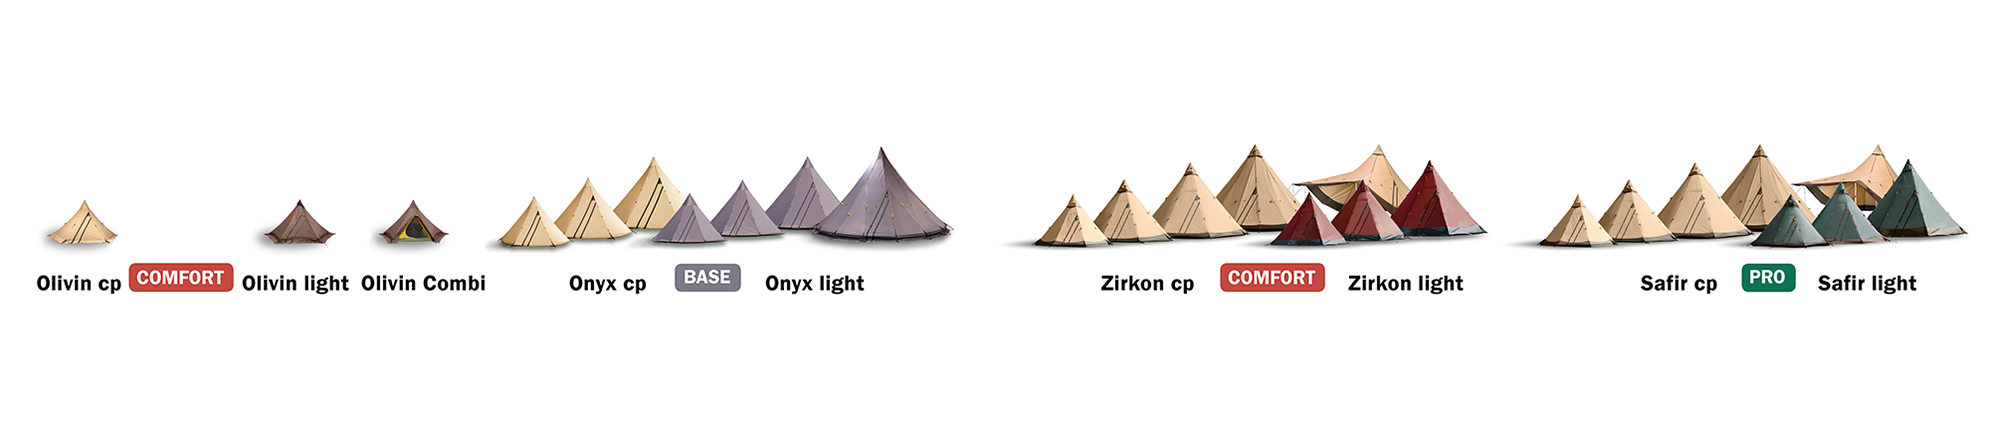 How to choose your Nordic tipi – what are your needs